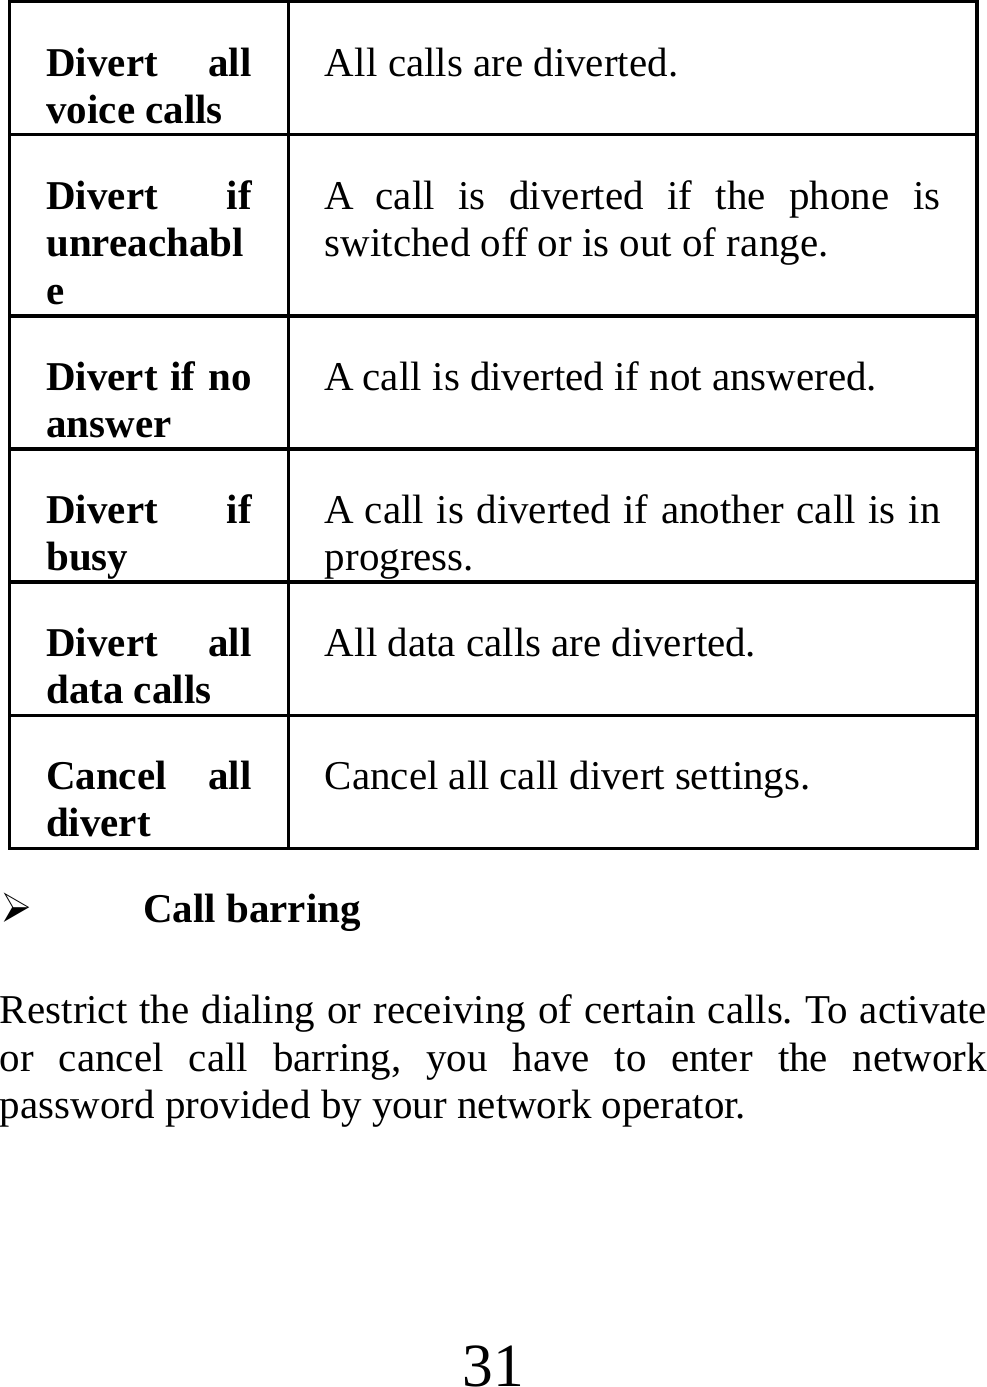  31 Divert all voice calls  All calls are diverted. Divert if unreachable A call is diverted if the phone is switched off or is out of range. Divert if no answer  A call is diverted if not answered. Divert if busy  A call is diverted if another call is in progress. Divert all data calls  All data calls are diverted. Cancel all divert  Cancel all call divert settings. ¾ Call barring Restrict the dialing or receiving of certain calls. To activate or cancel call barring, you have to enter the network password provided by your network operator. 